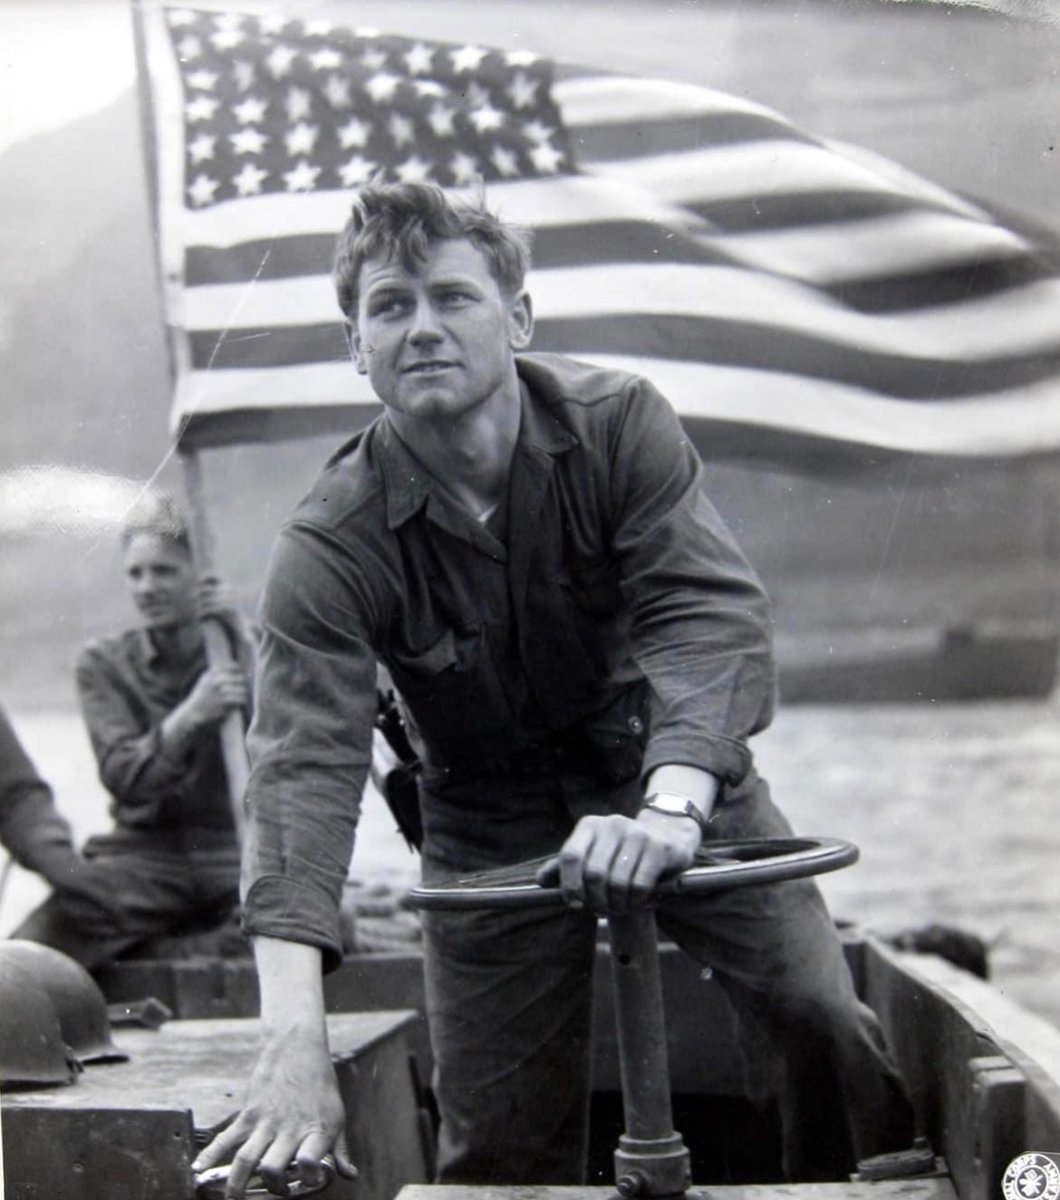 From the AFN Files, 1945. In March, with American flag flying, Motor Machinist’s Mate Robert Mooty, USN, ferried troops across the Rhine River at Oberwesel, Germany. The Navy unit carried over 15,000 troops across the Rhine in 4 days, greatly aiding a rapid Allied advance. 🇺🇸